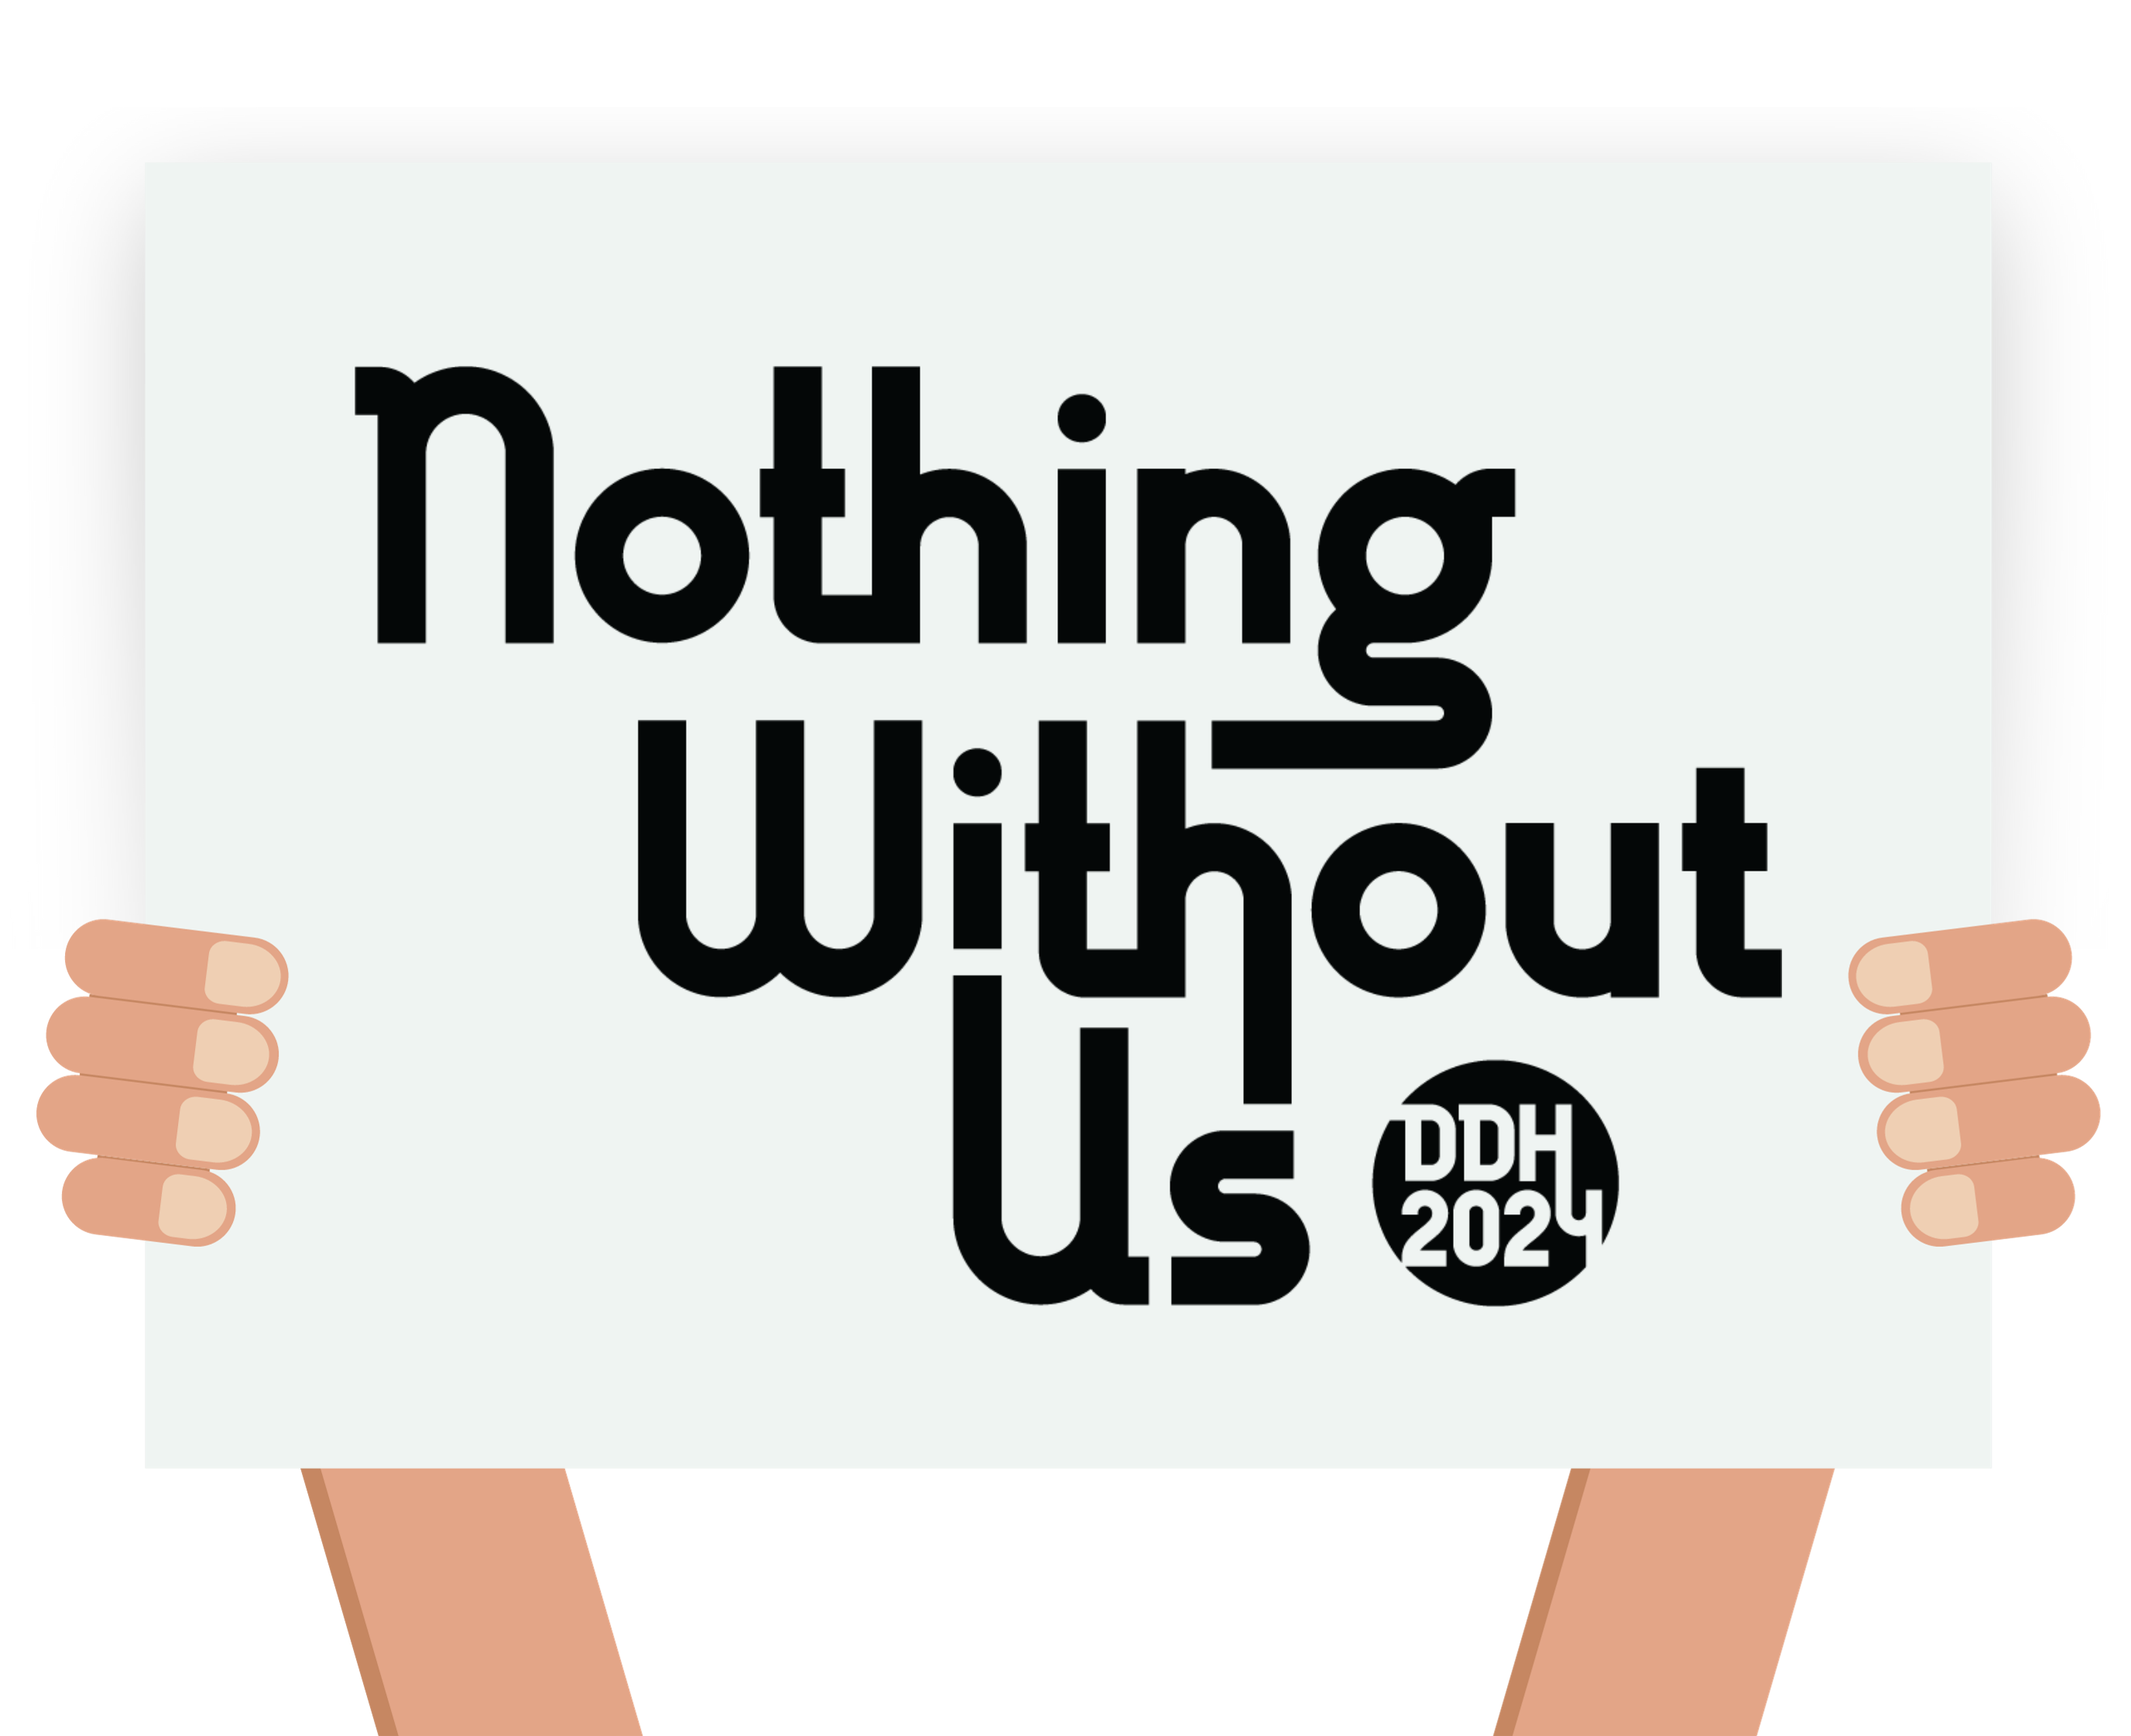 DDH 2024 "Nothing Without Us" logo on a sign